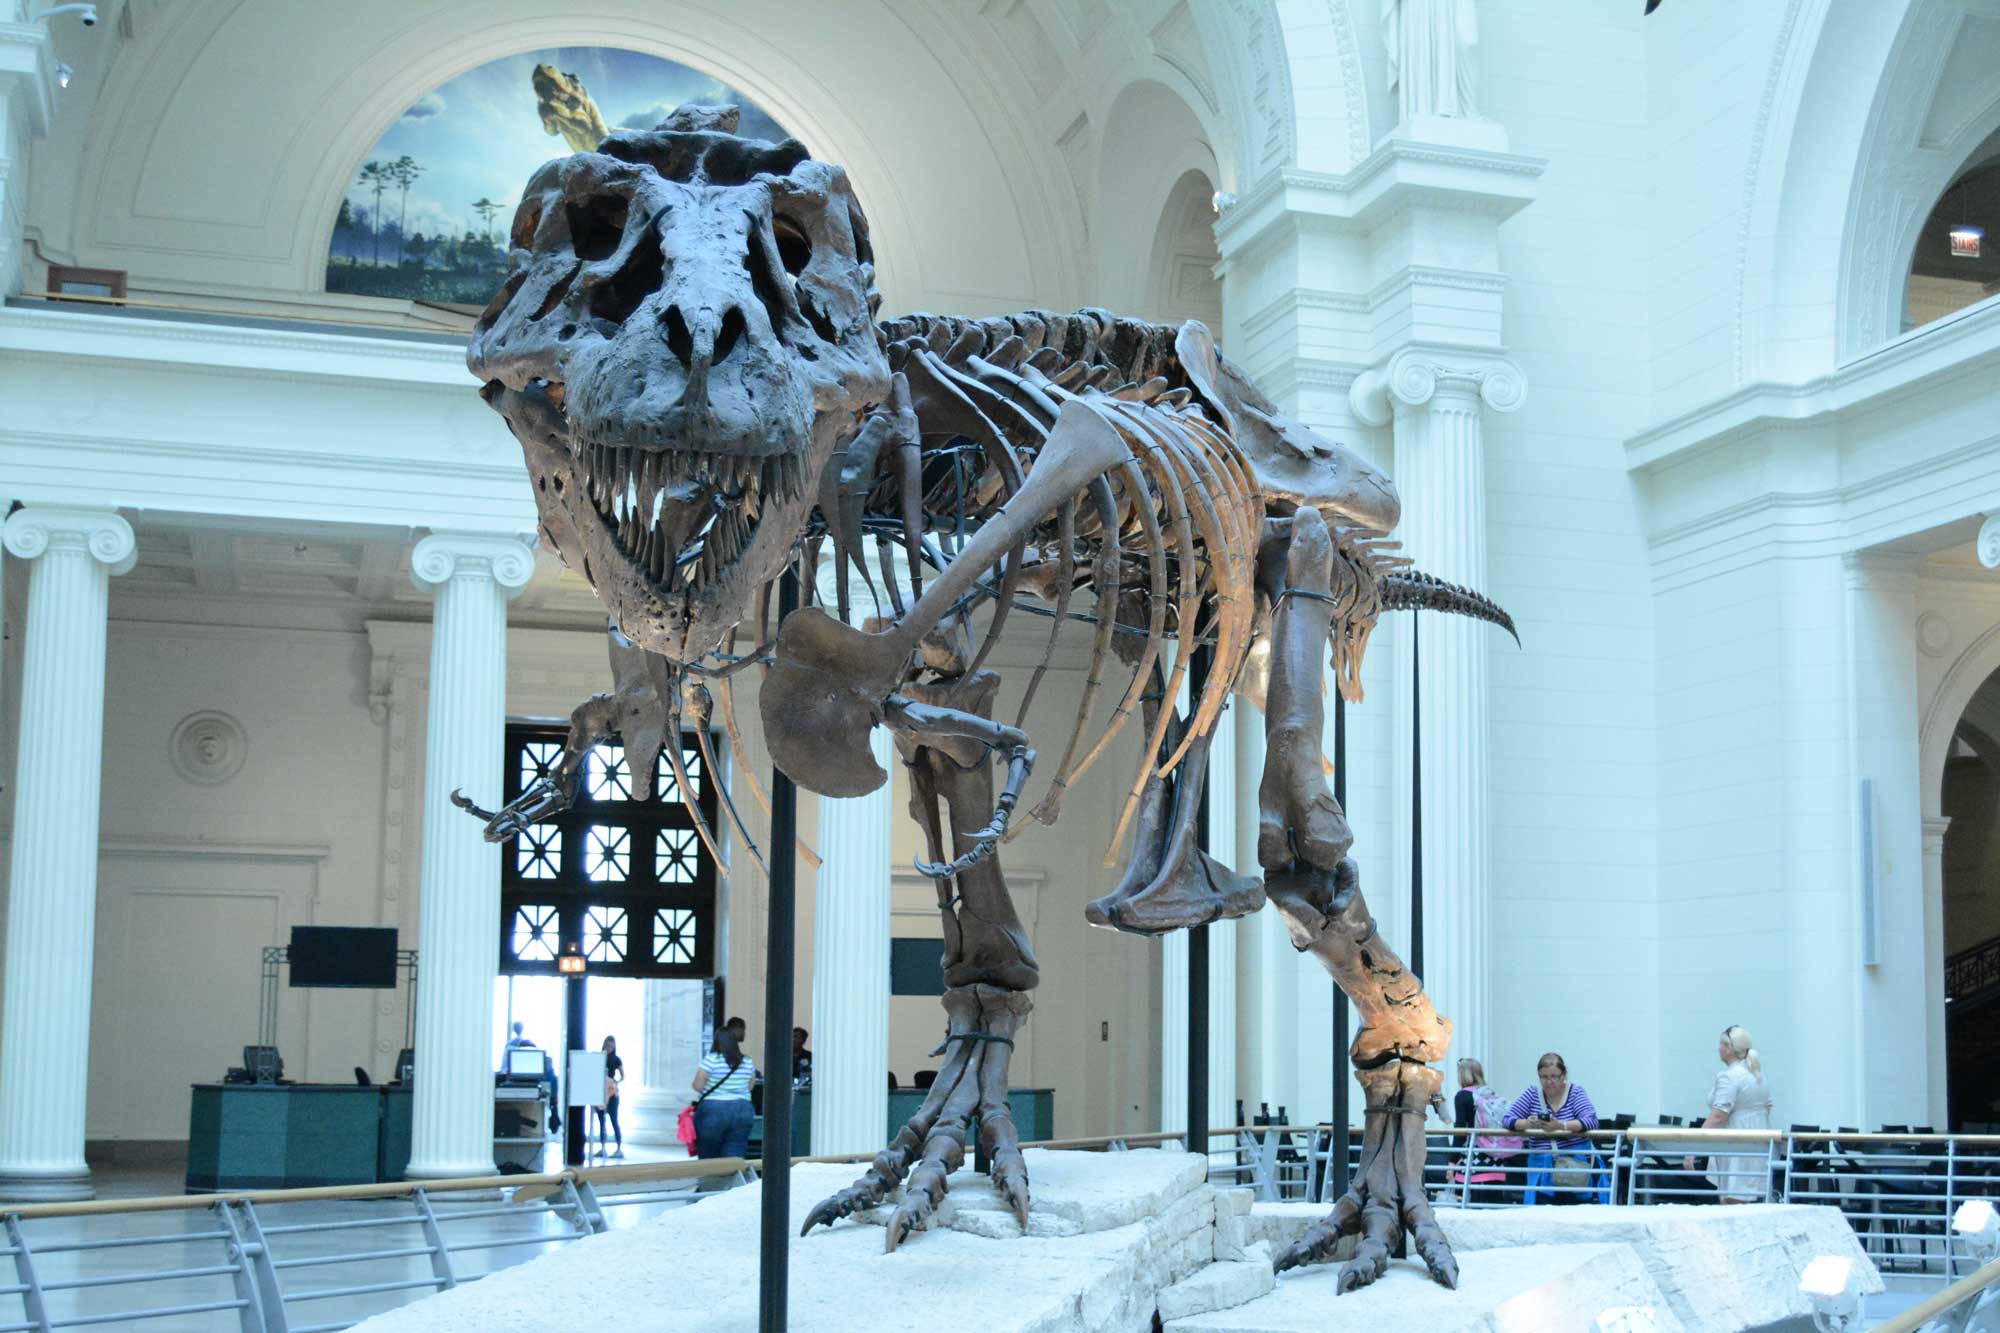 Photograph of Sue the T. rex on exhibit at the Field Museum in Chicago.